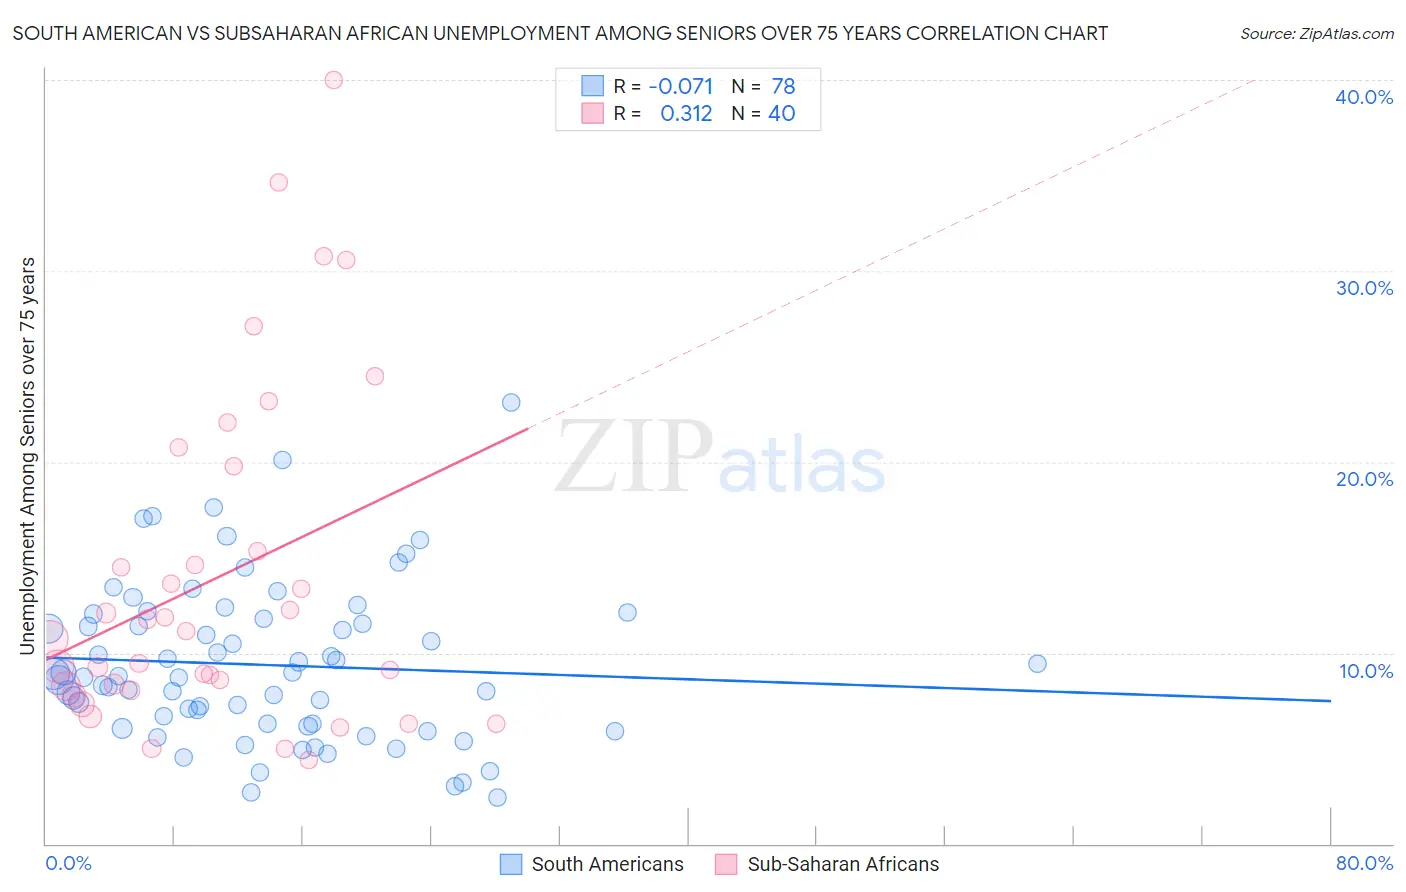 South American vs Subsaharan African Unemployment Among Seniors over 75 years